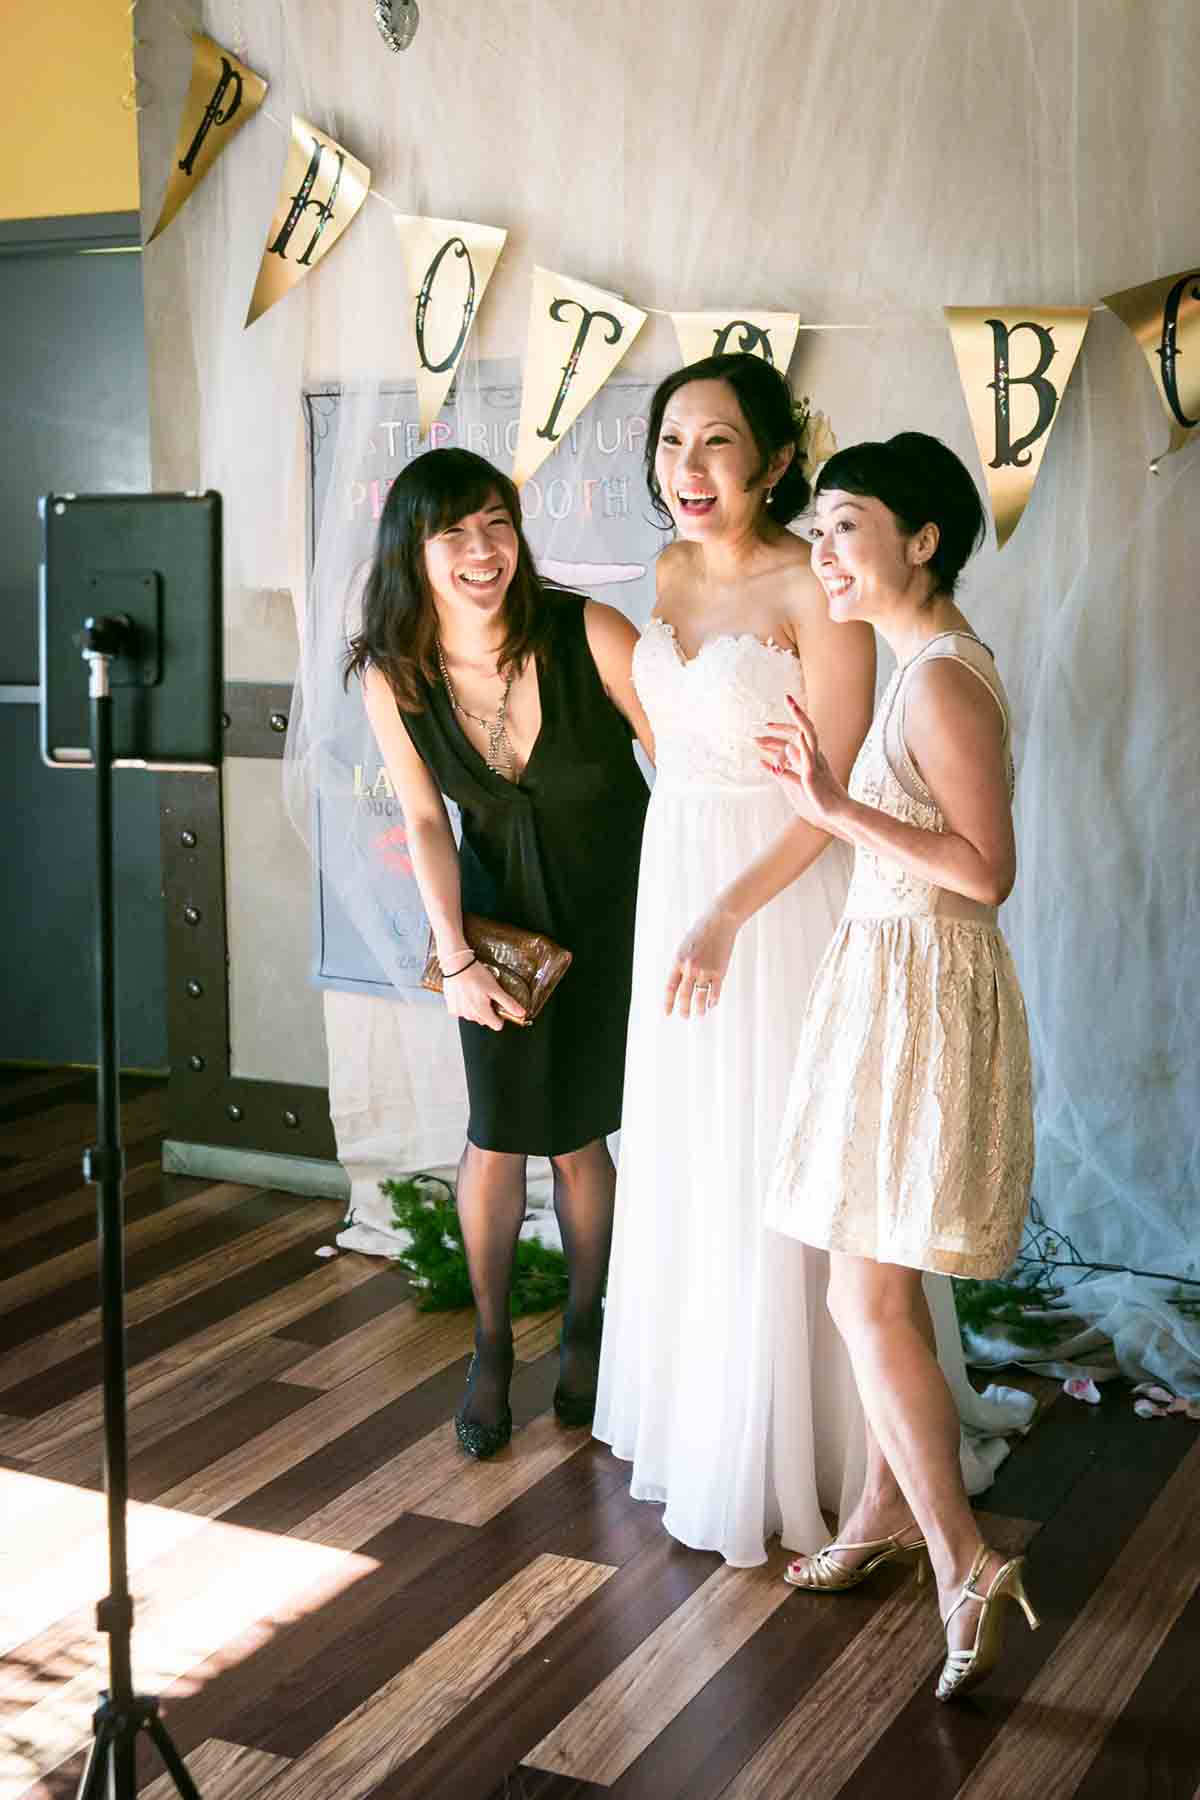 Bride and two female guests having fun in front of photo booth camera